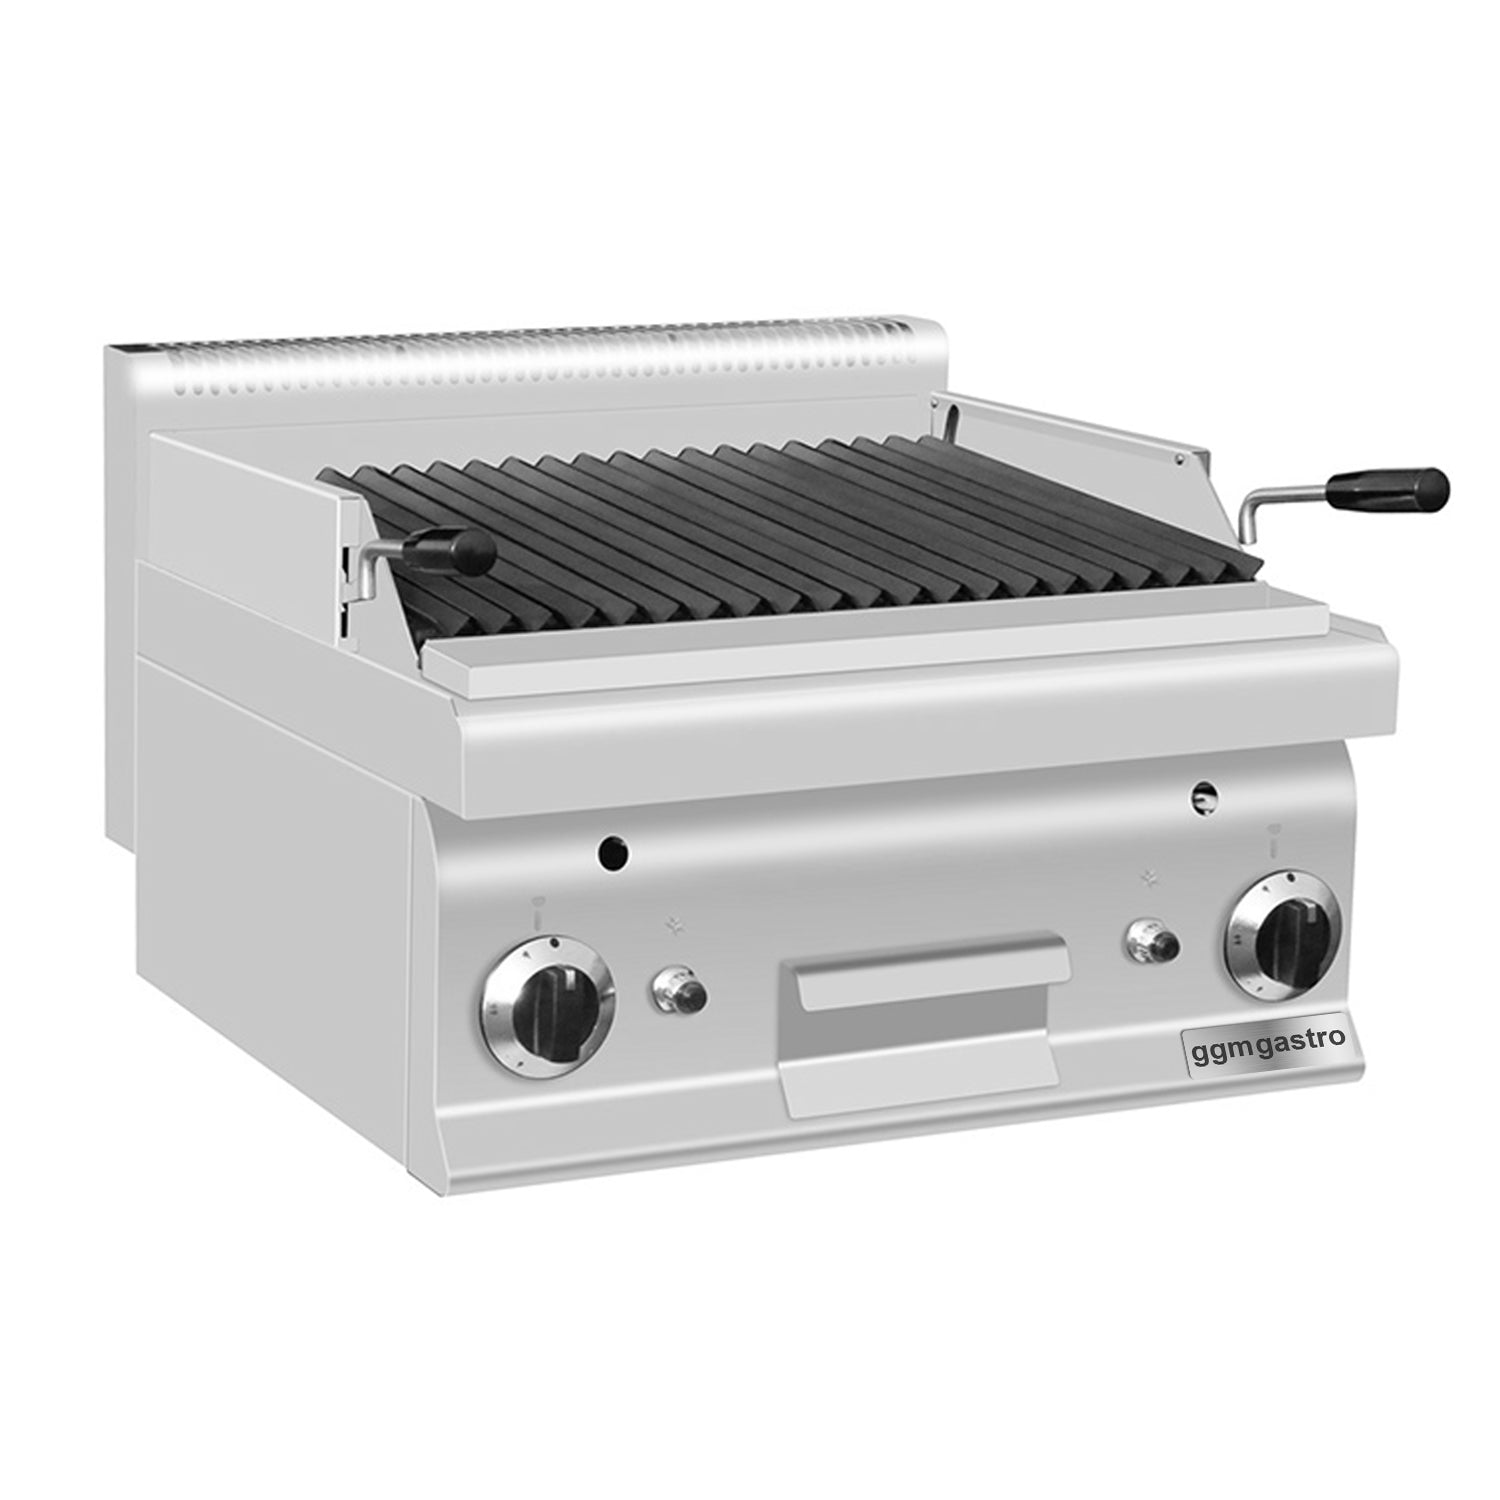 Gass lavastein Grill (14 kW)-sving matlaging Grill